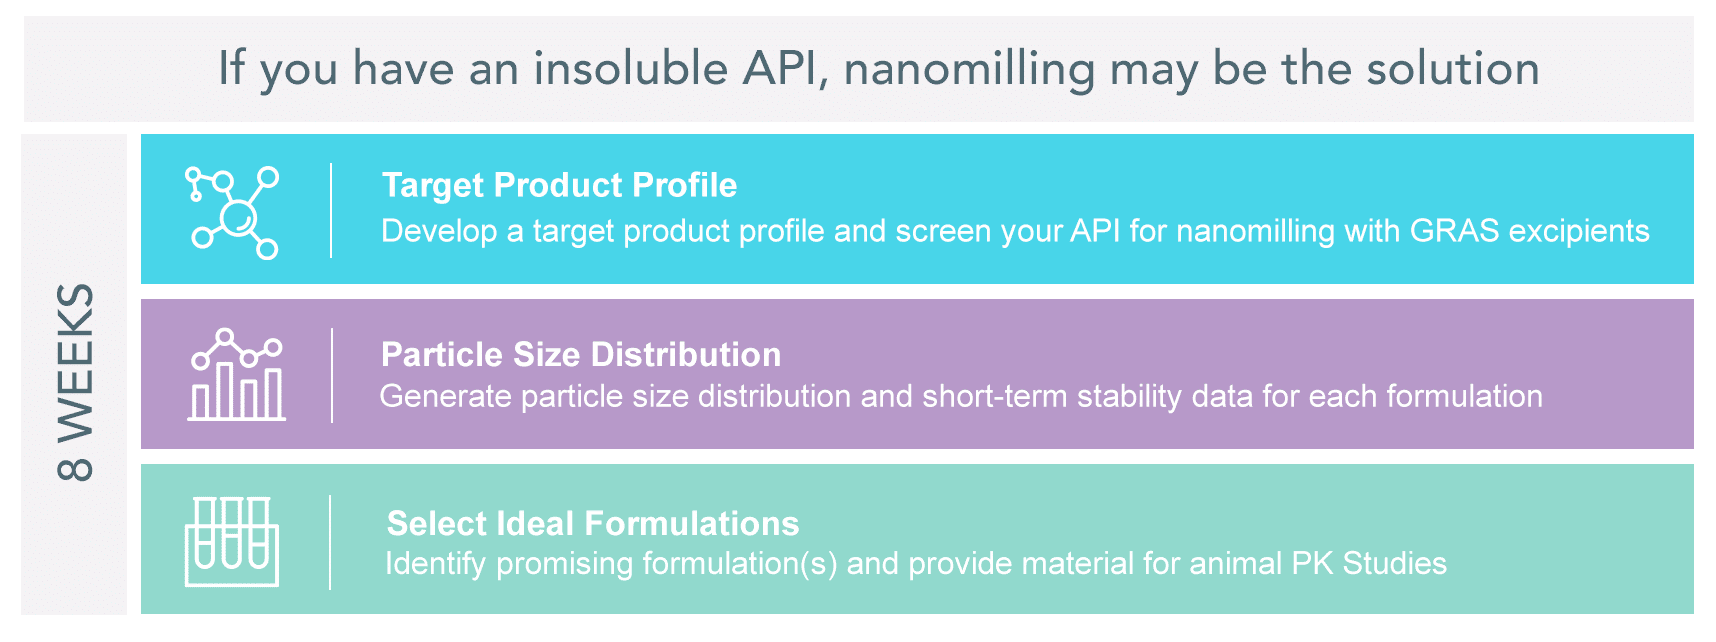 Nanomilling-Feasibility-Services